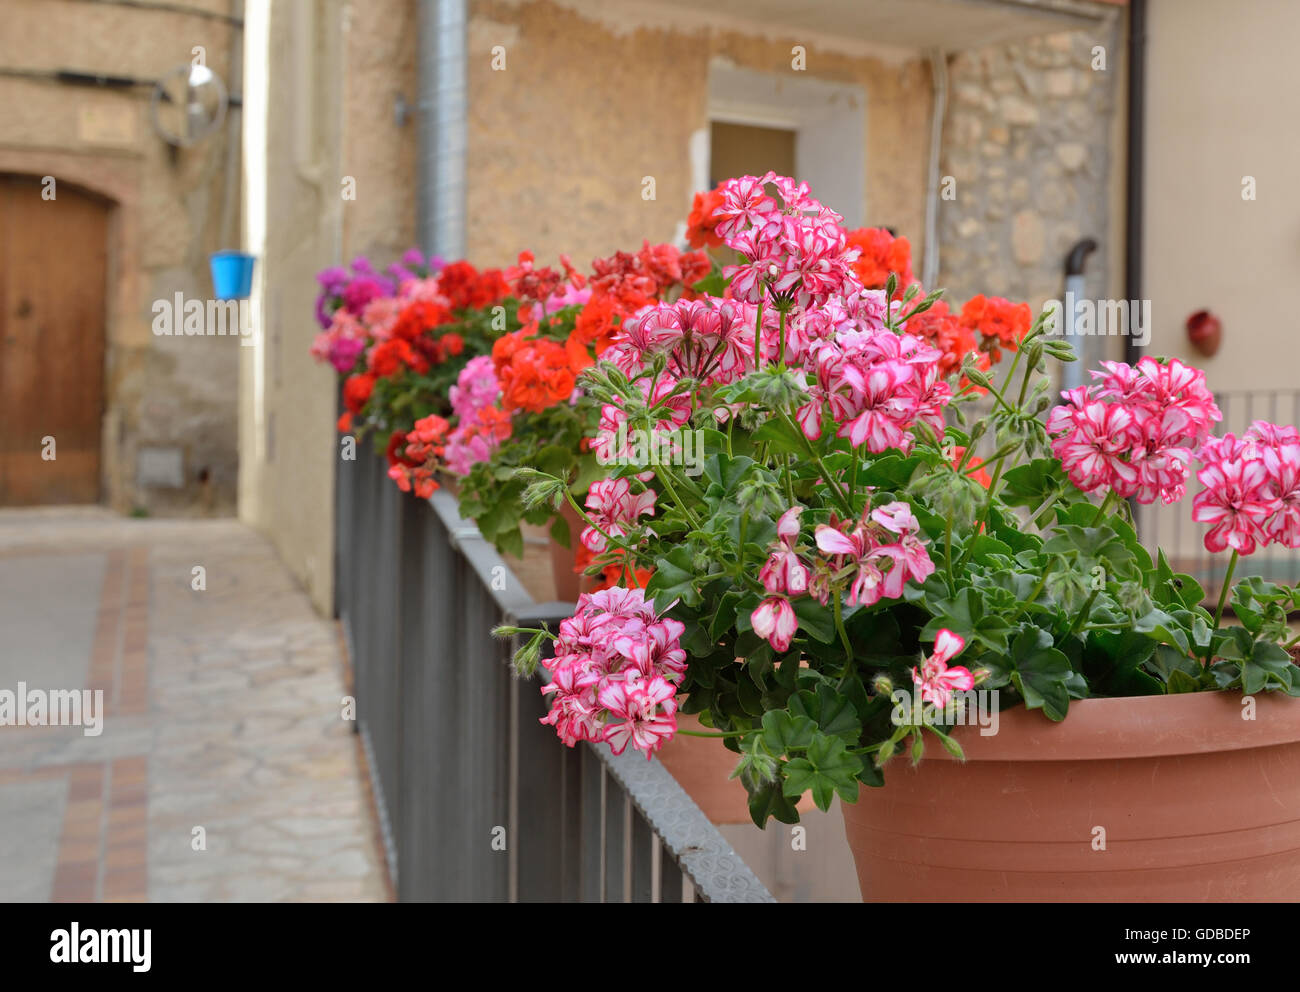 Street decorated with flowers in the pots Stock Photo